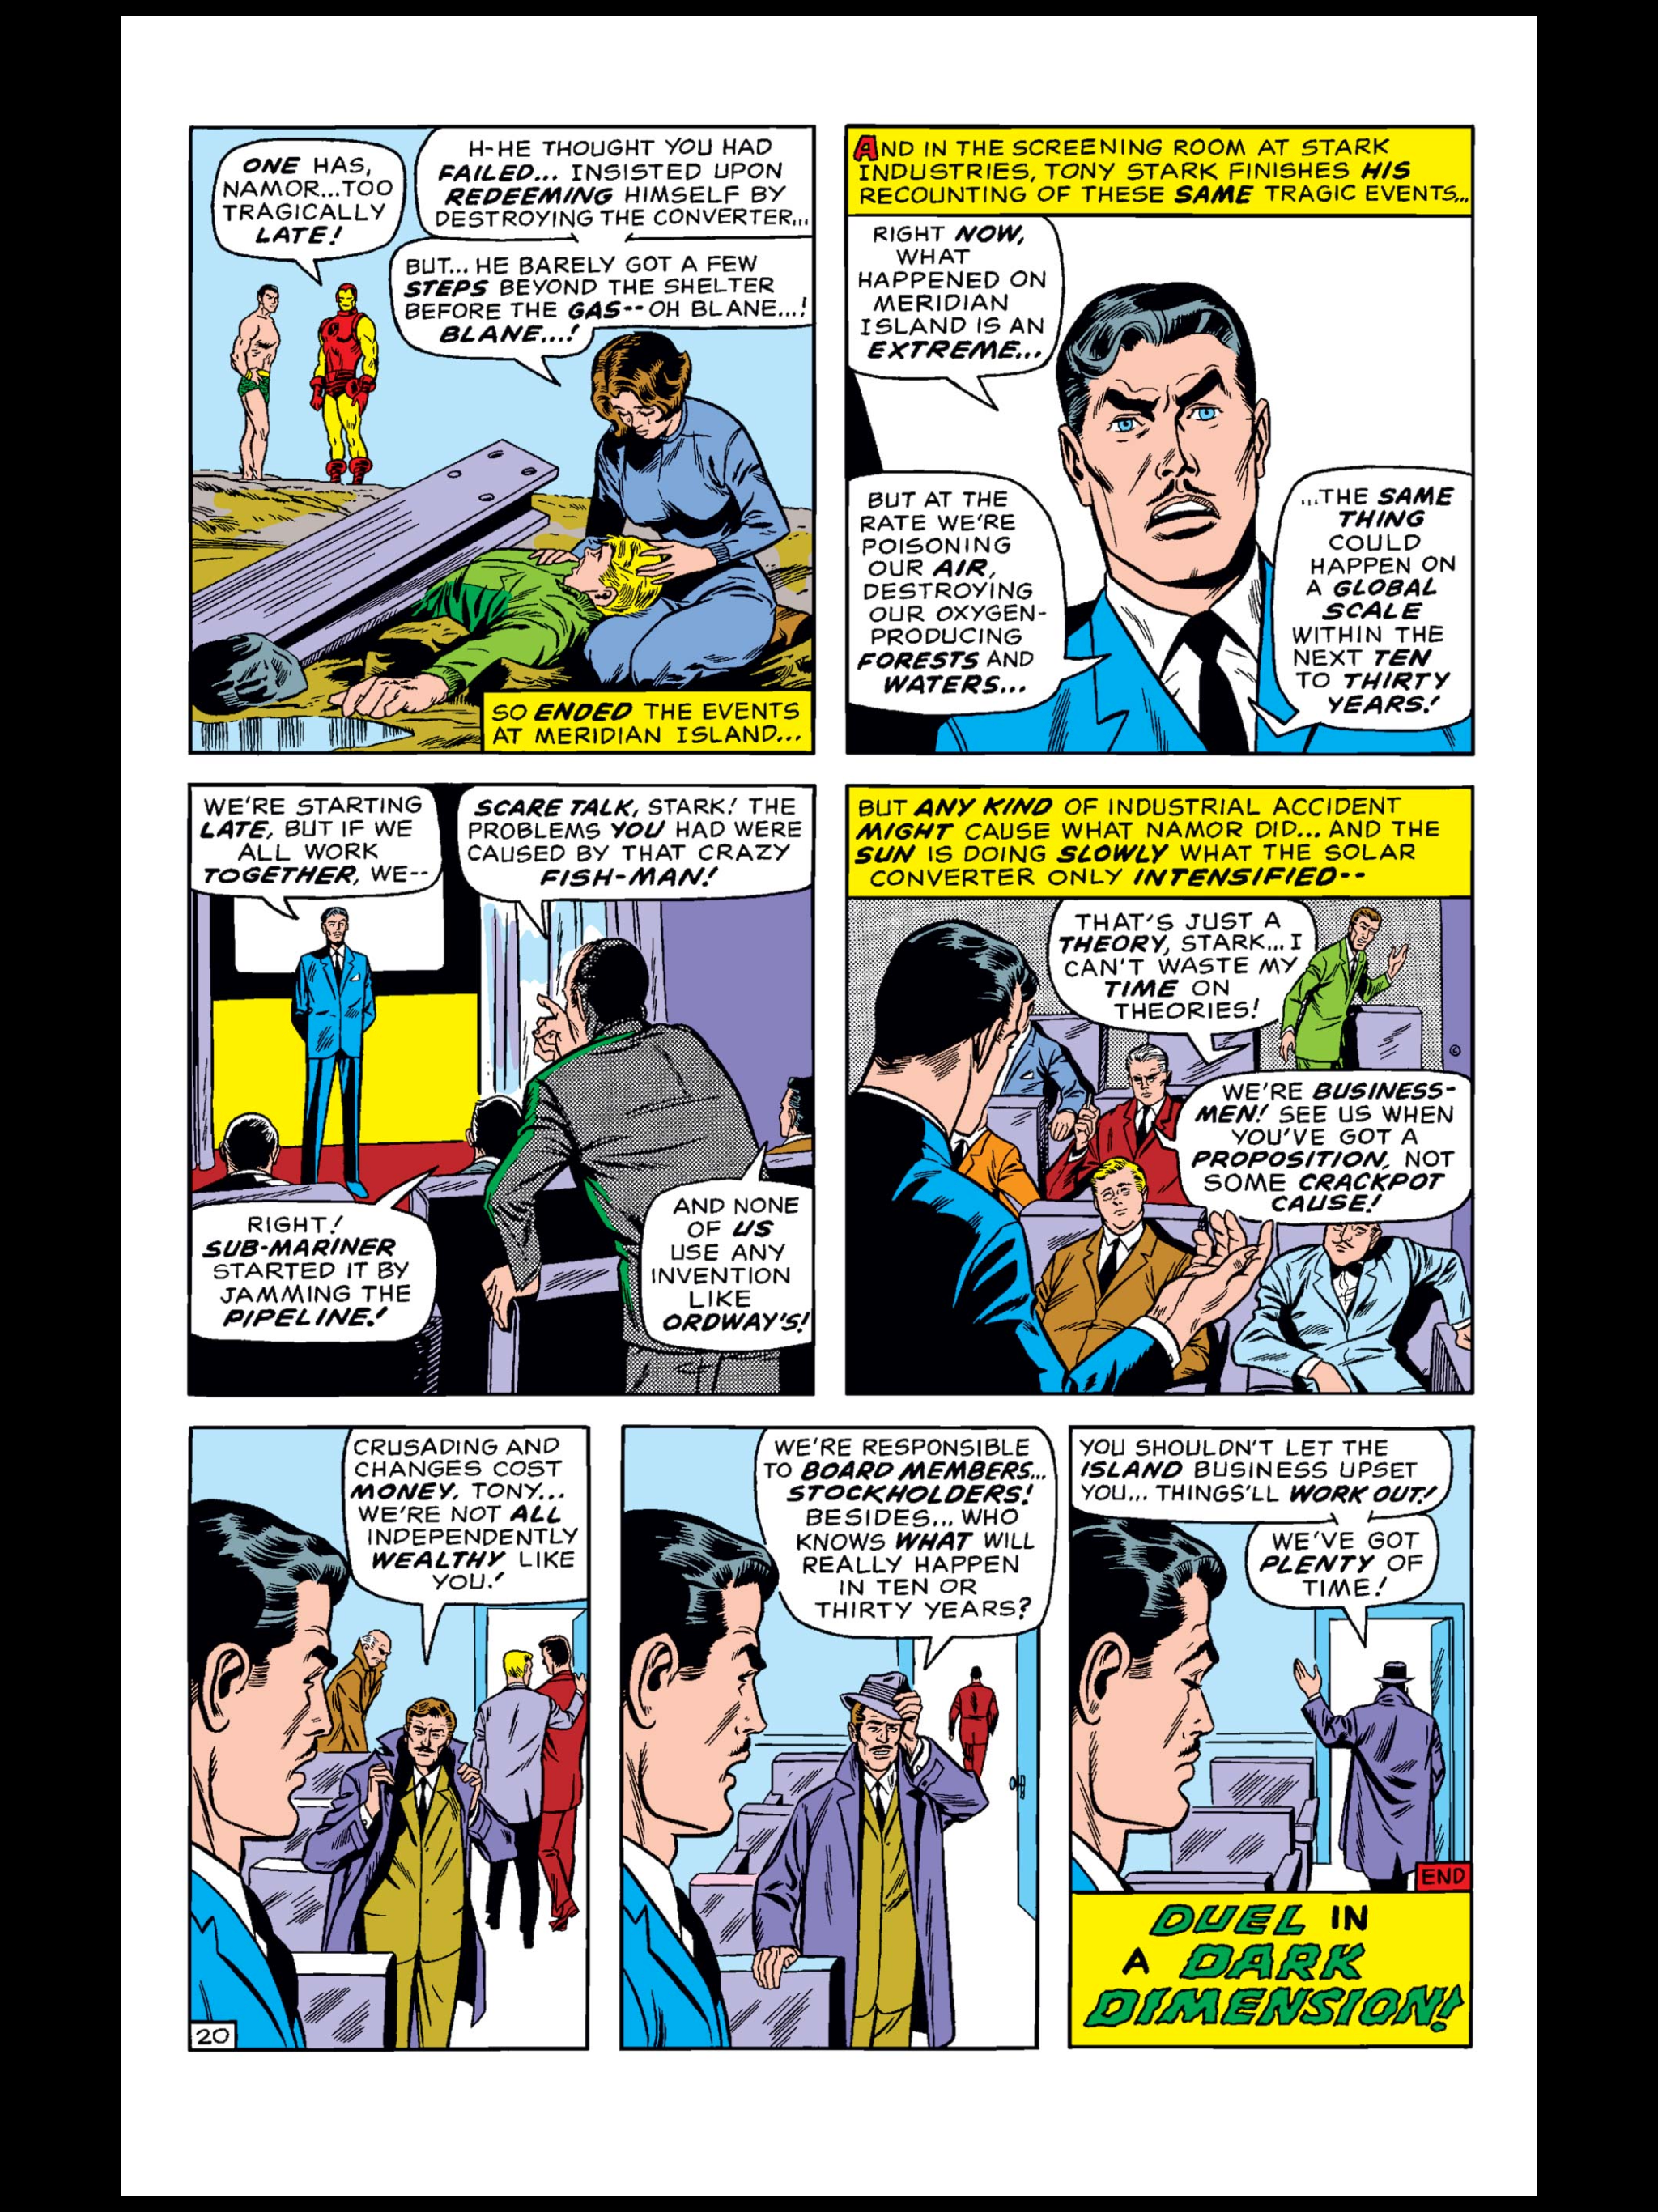 A page from a classic Iron Man comic issue.